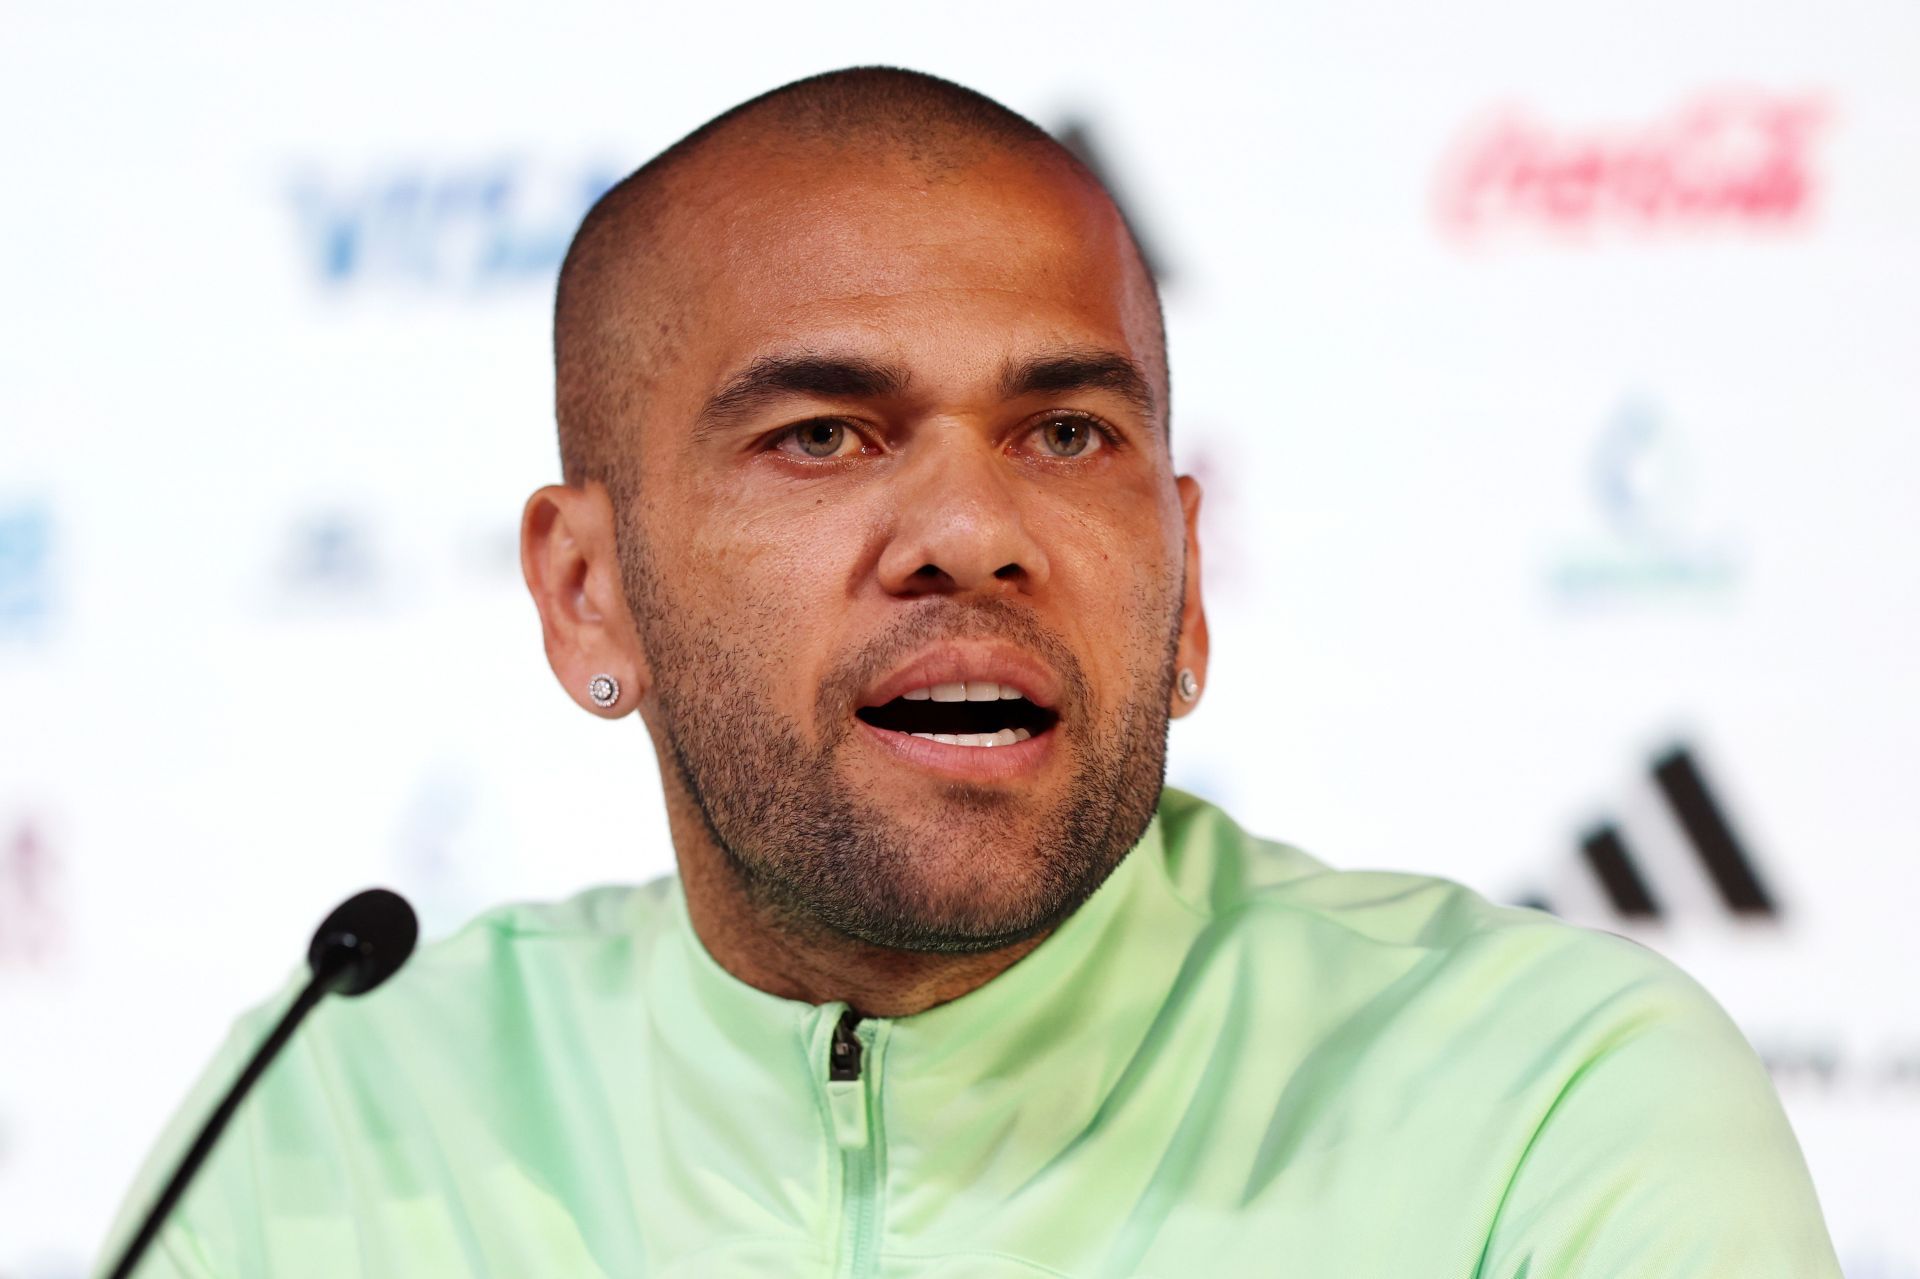 Dani Alves has denied all allegations of sexual assault.